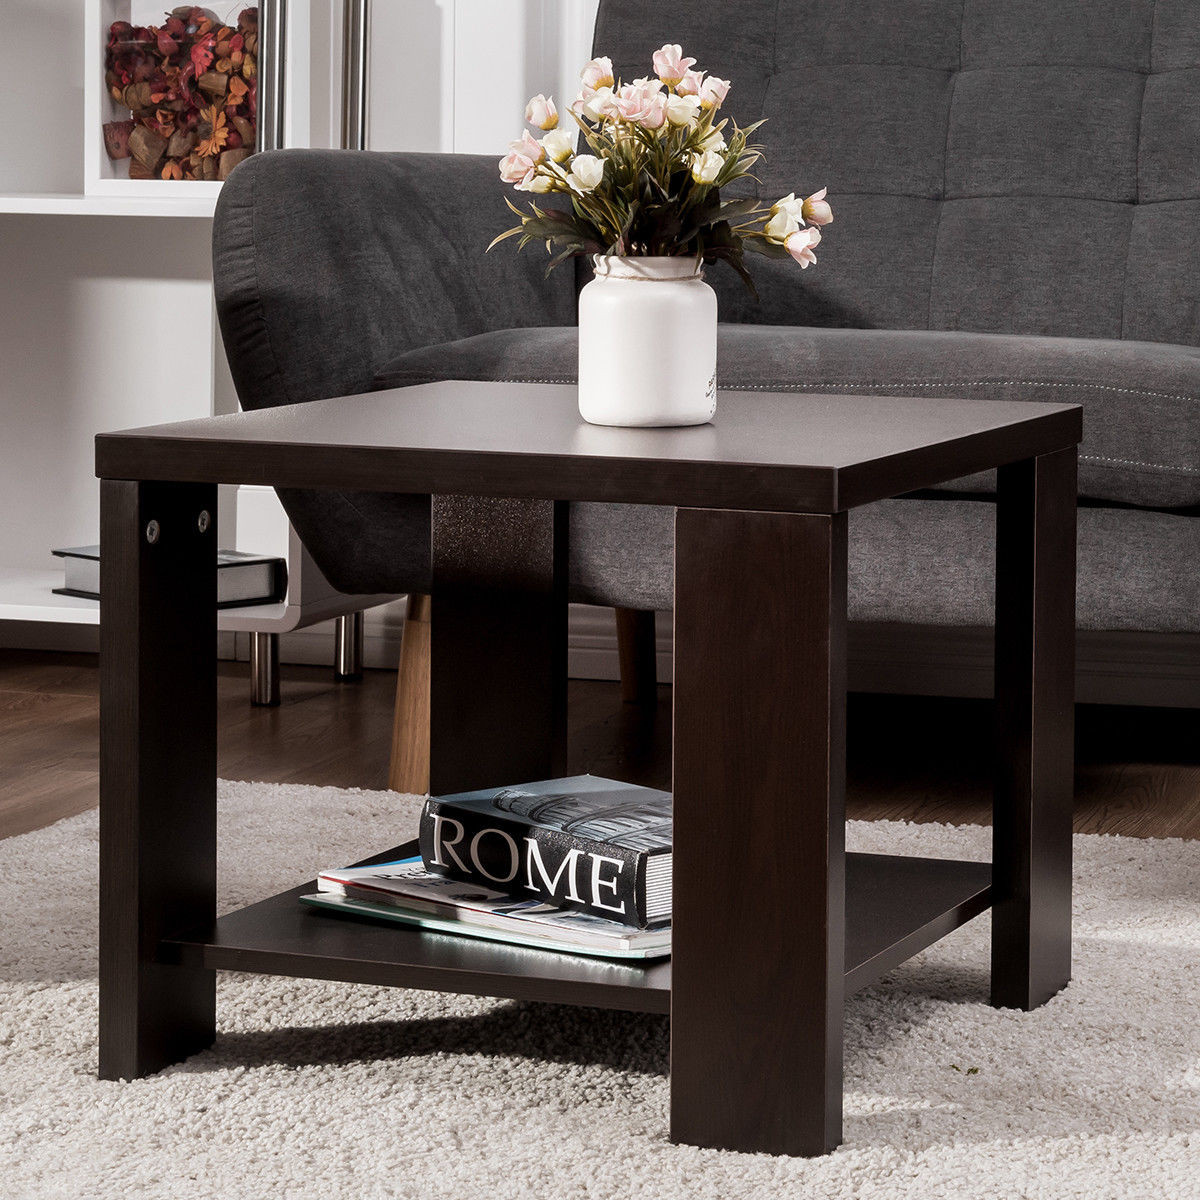 Living Room Table With Storage
 Giantex Living Room End Coffee Table Square Sofa Side